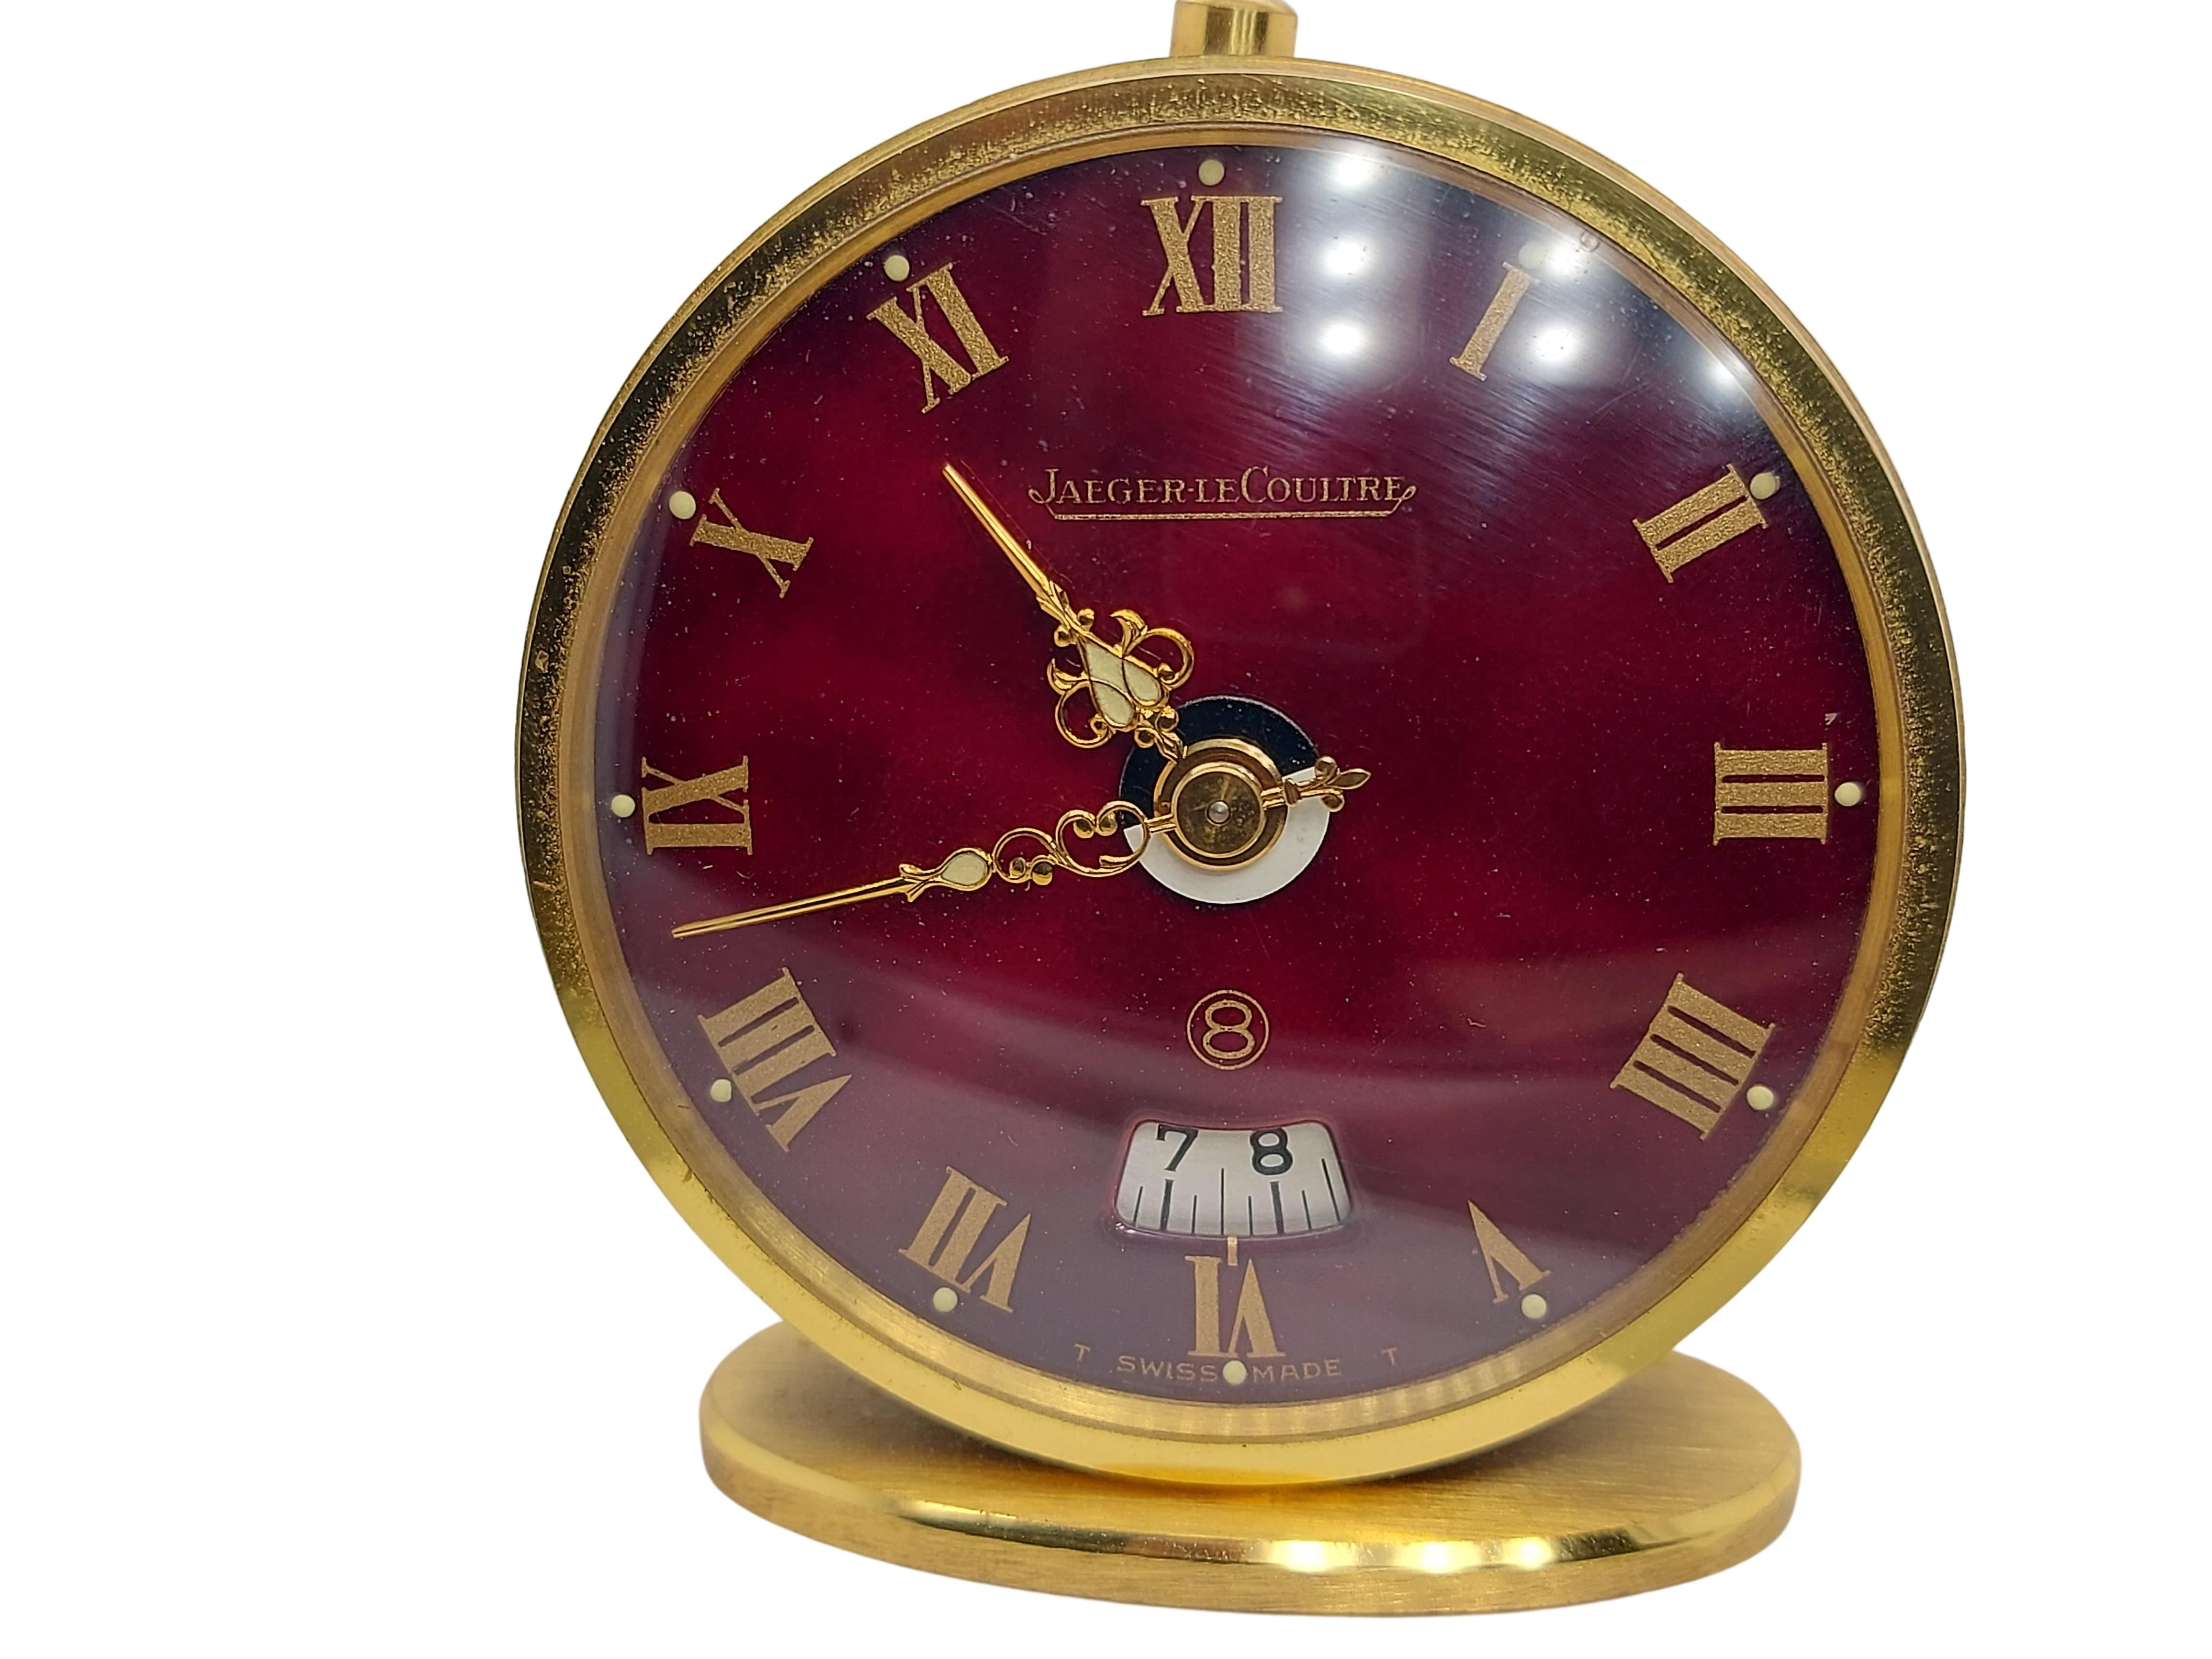 Travel Alarm Clock, Jaeger Le Coultre Reveil Rouge 8 Jours With Box and Papers from Old Stock !

Case: Material gold plated, Width 46mm, Length 50.5 mm, Thickness 28mm

Dial: Red dial, Gold Roman Numerals, Gold indexes, Date window

Total weight: